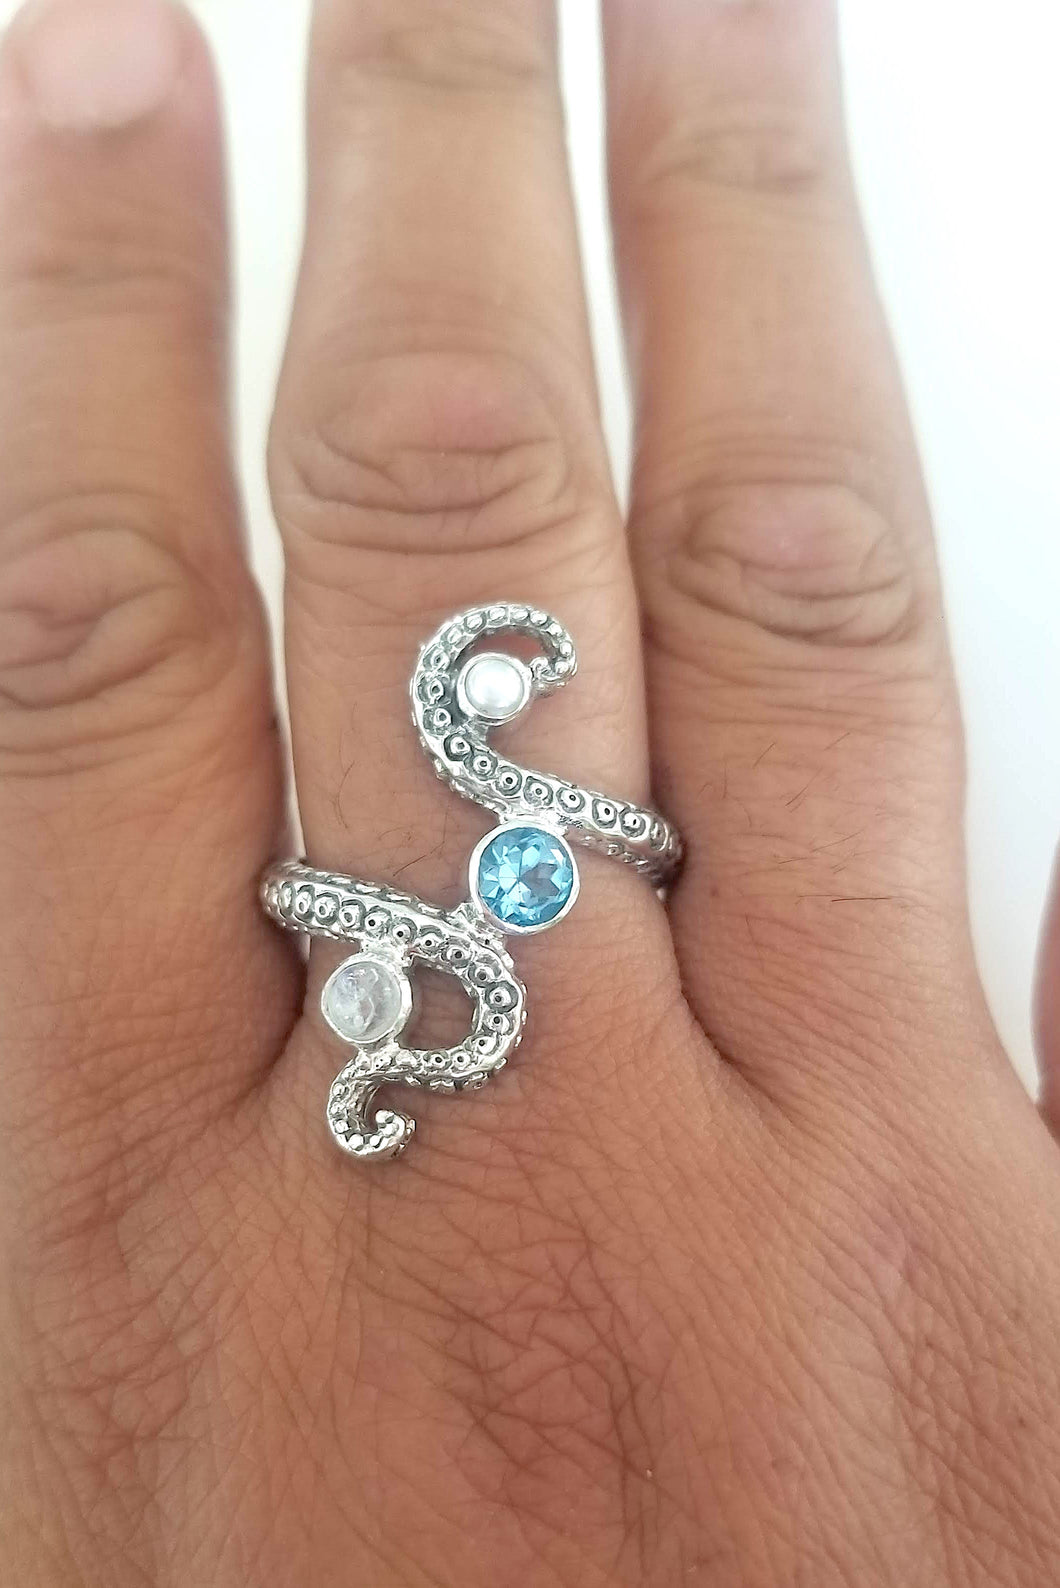 Octopus Tentacle Ring with Topaz